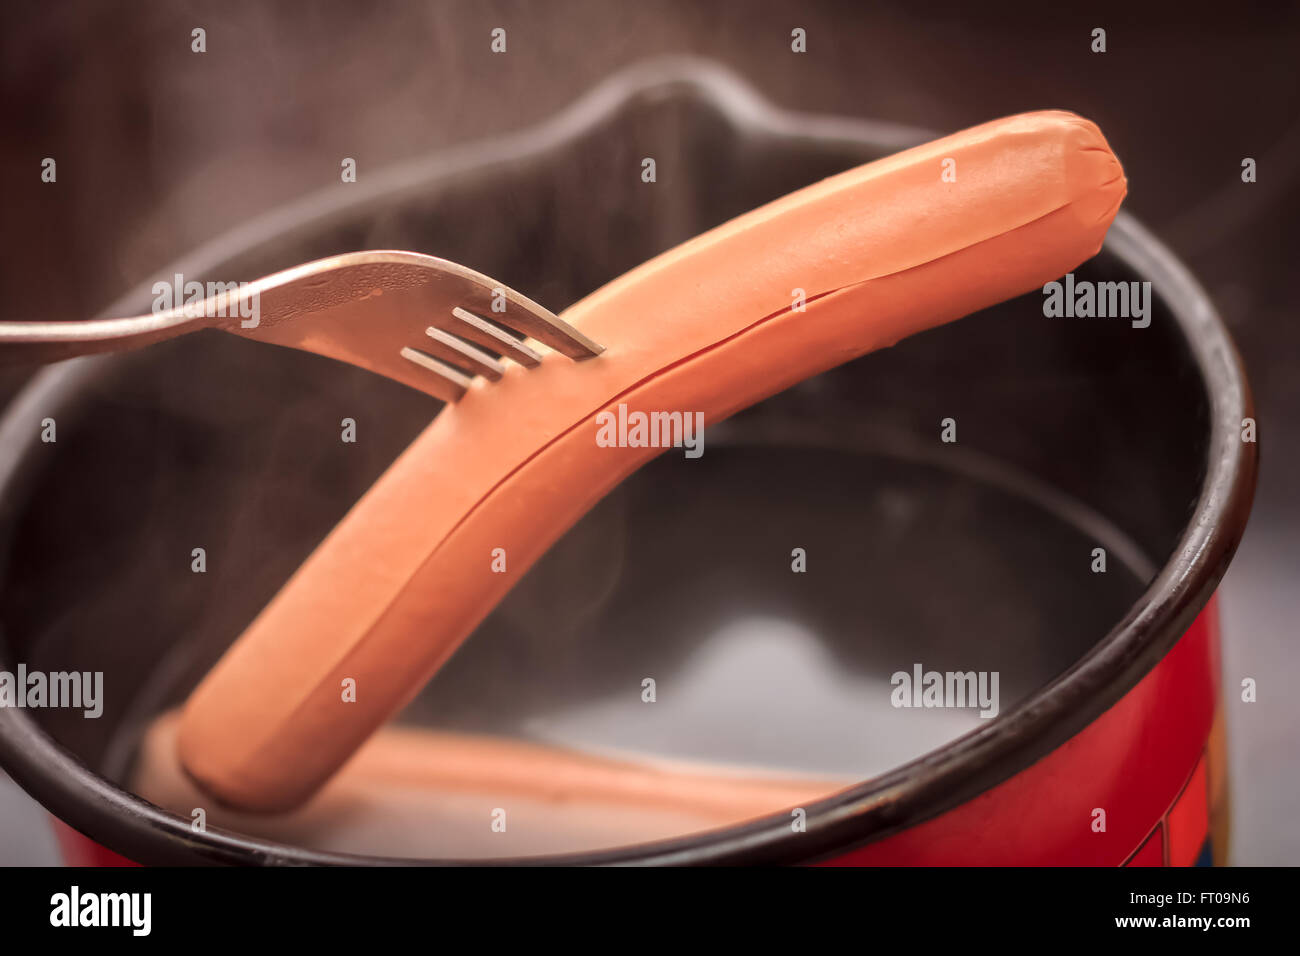 Cooking hot dogs in pot, one taken out with fork Stock Photo